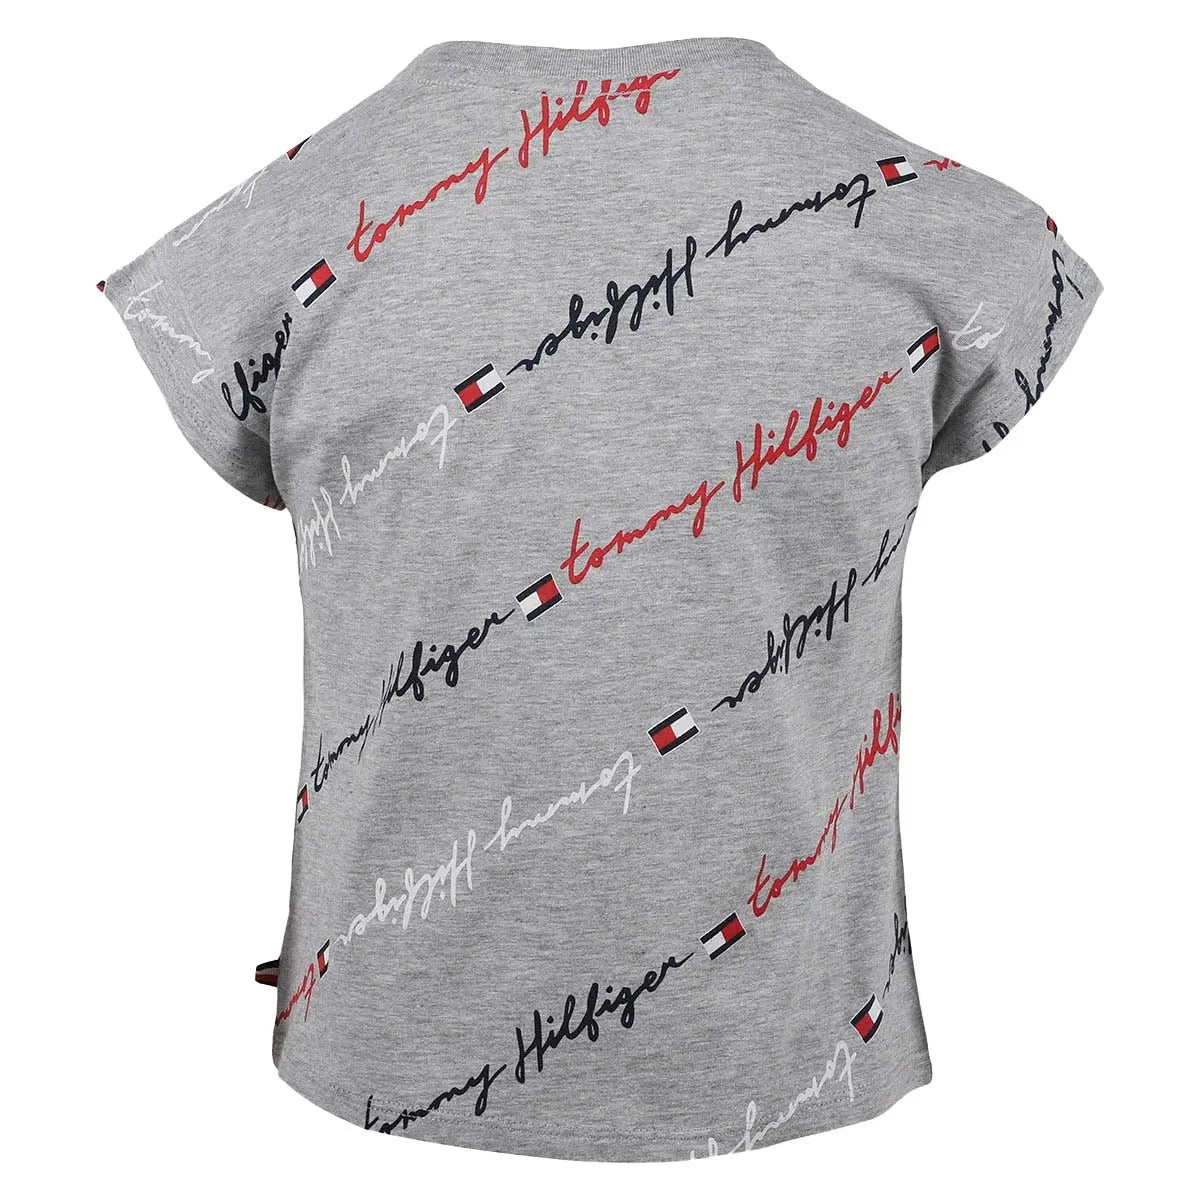 Tommy Hilfiger Girl's Allover Script Print Tee